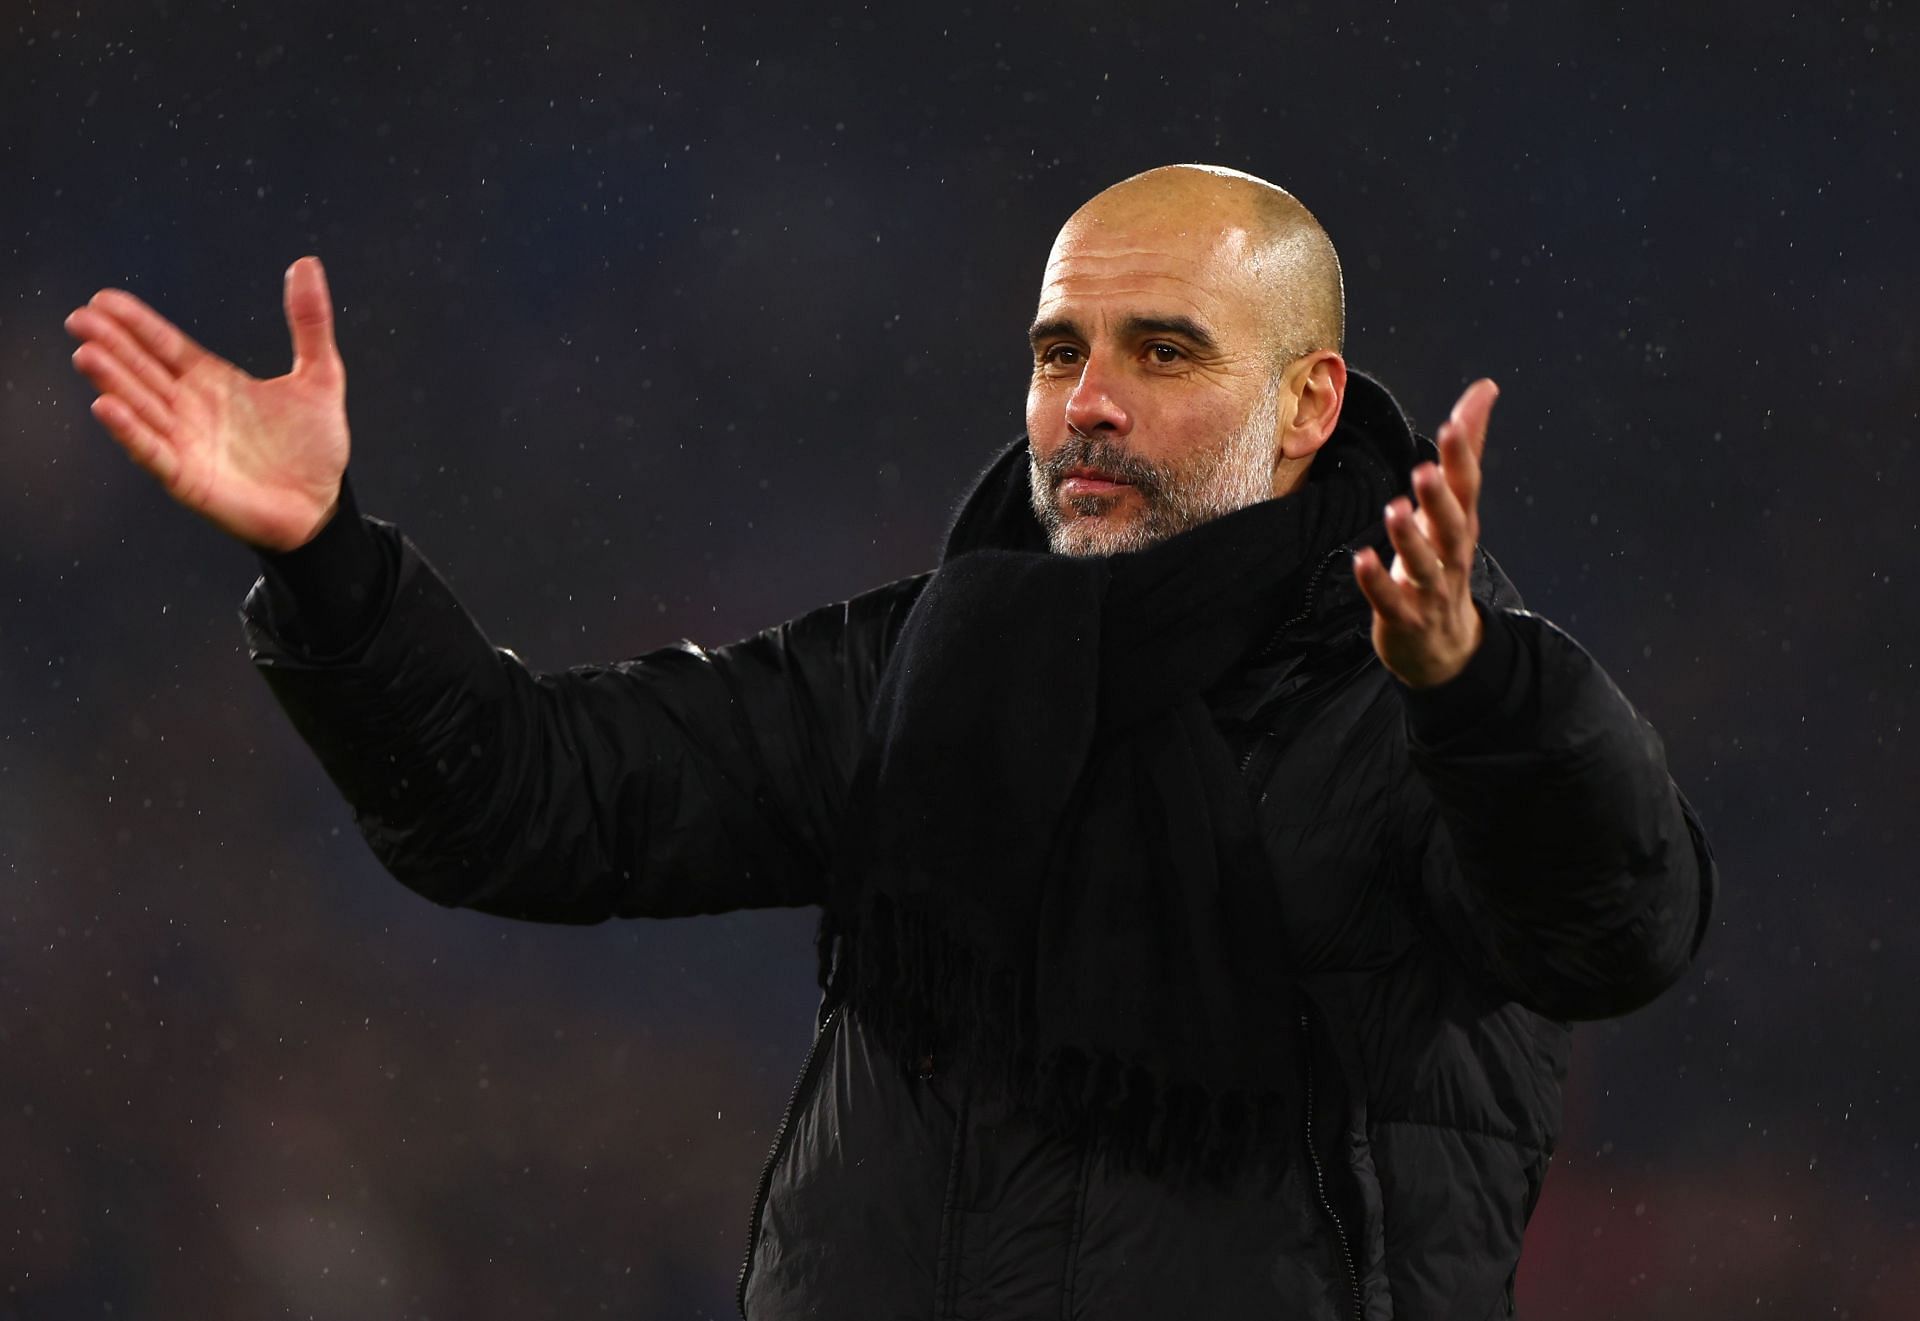 Guardiola left the Catalan giants in the summer of 2012.